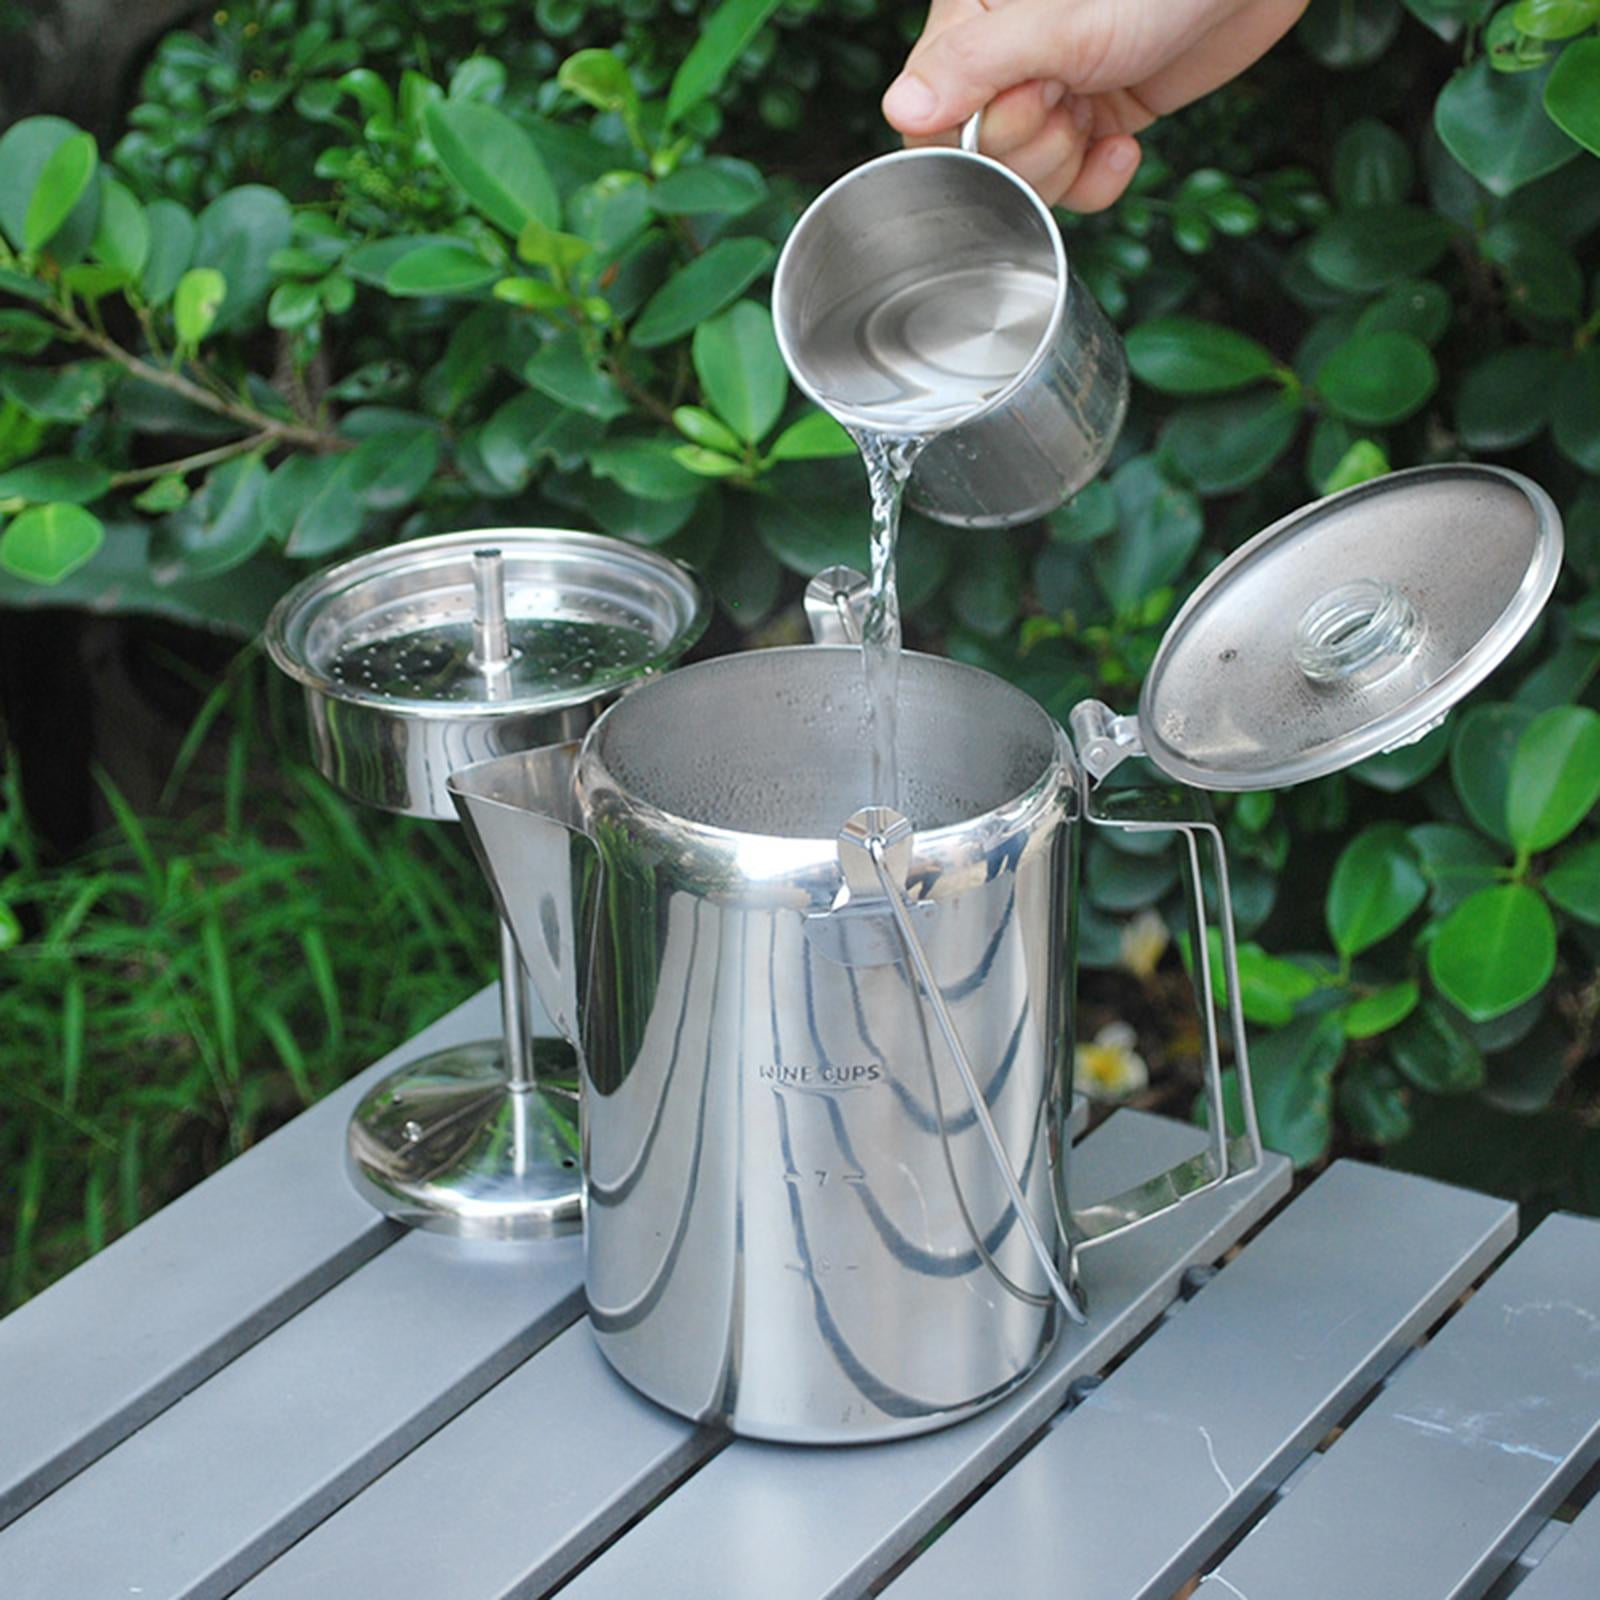 Butte Camping Coffee Pot Campfire Coffee Pot Stainless Steel